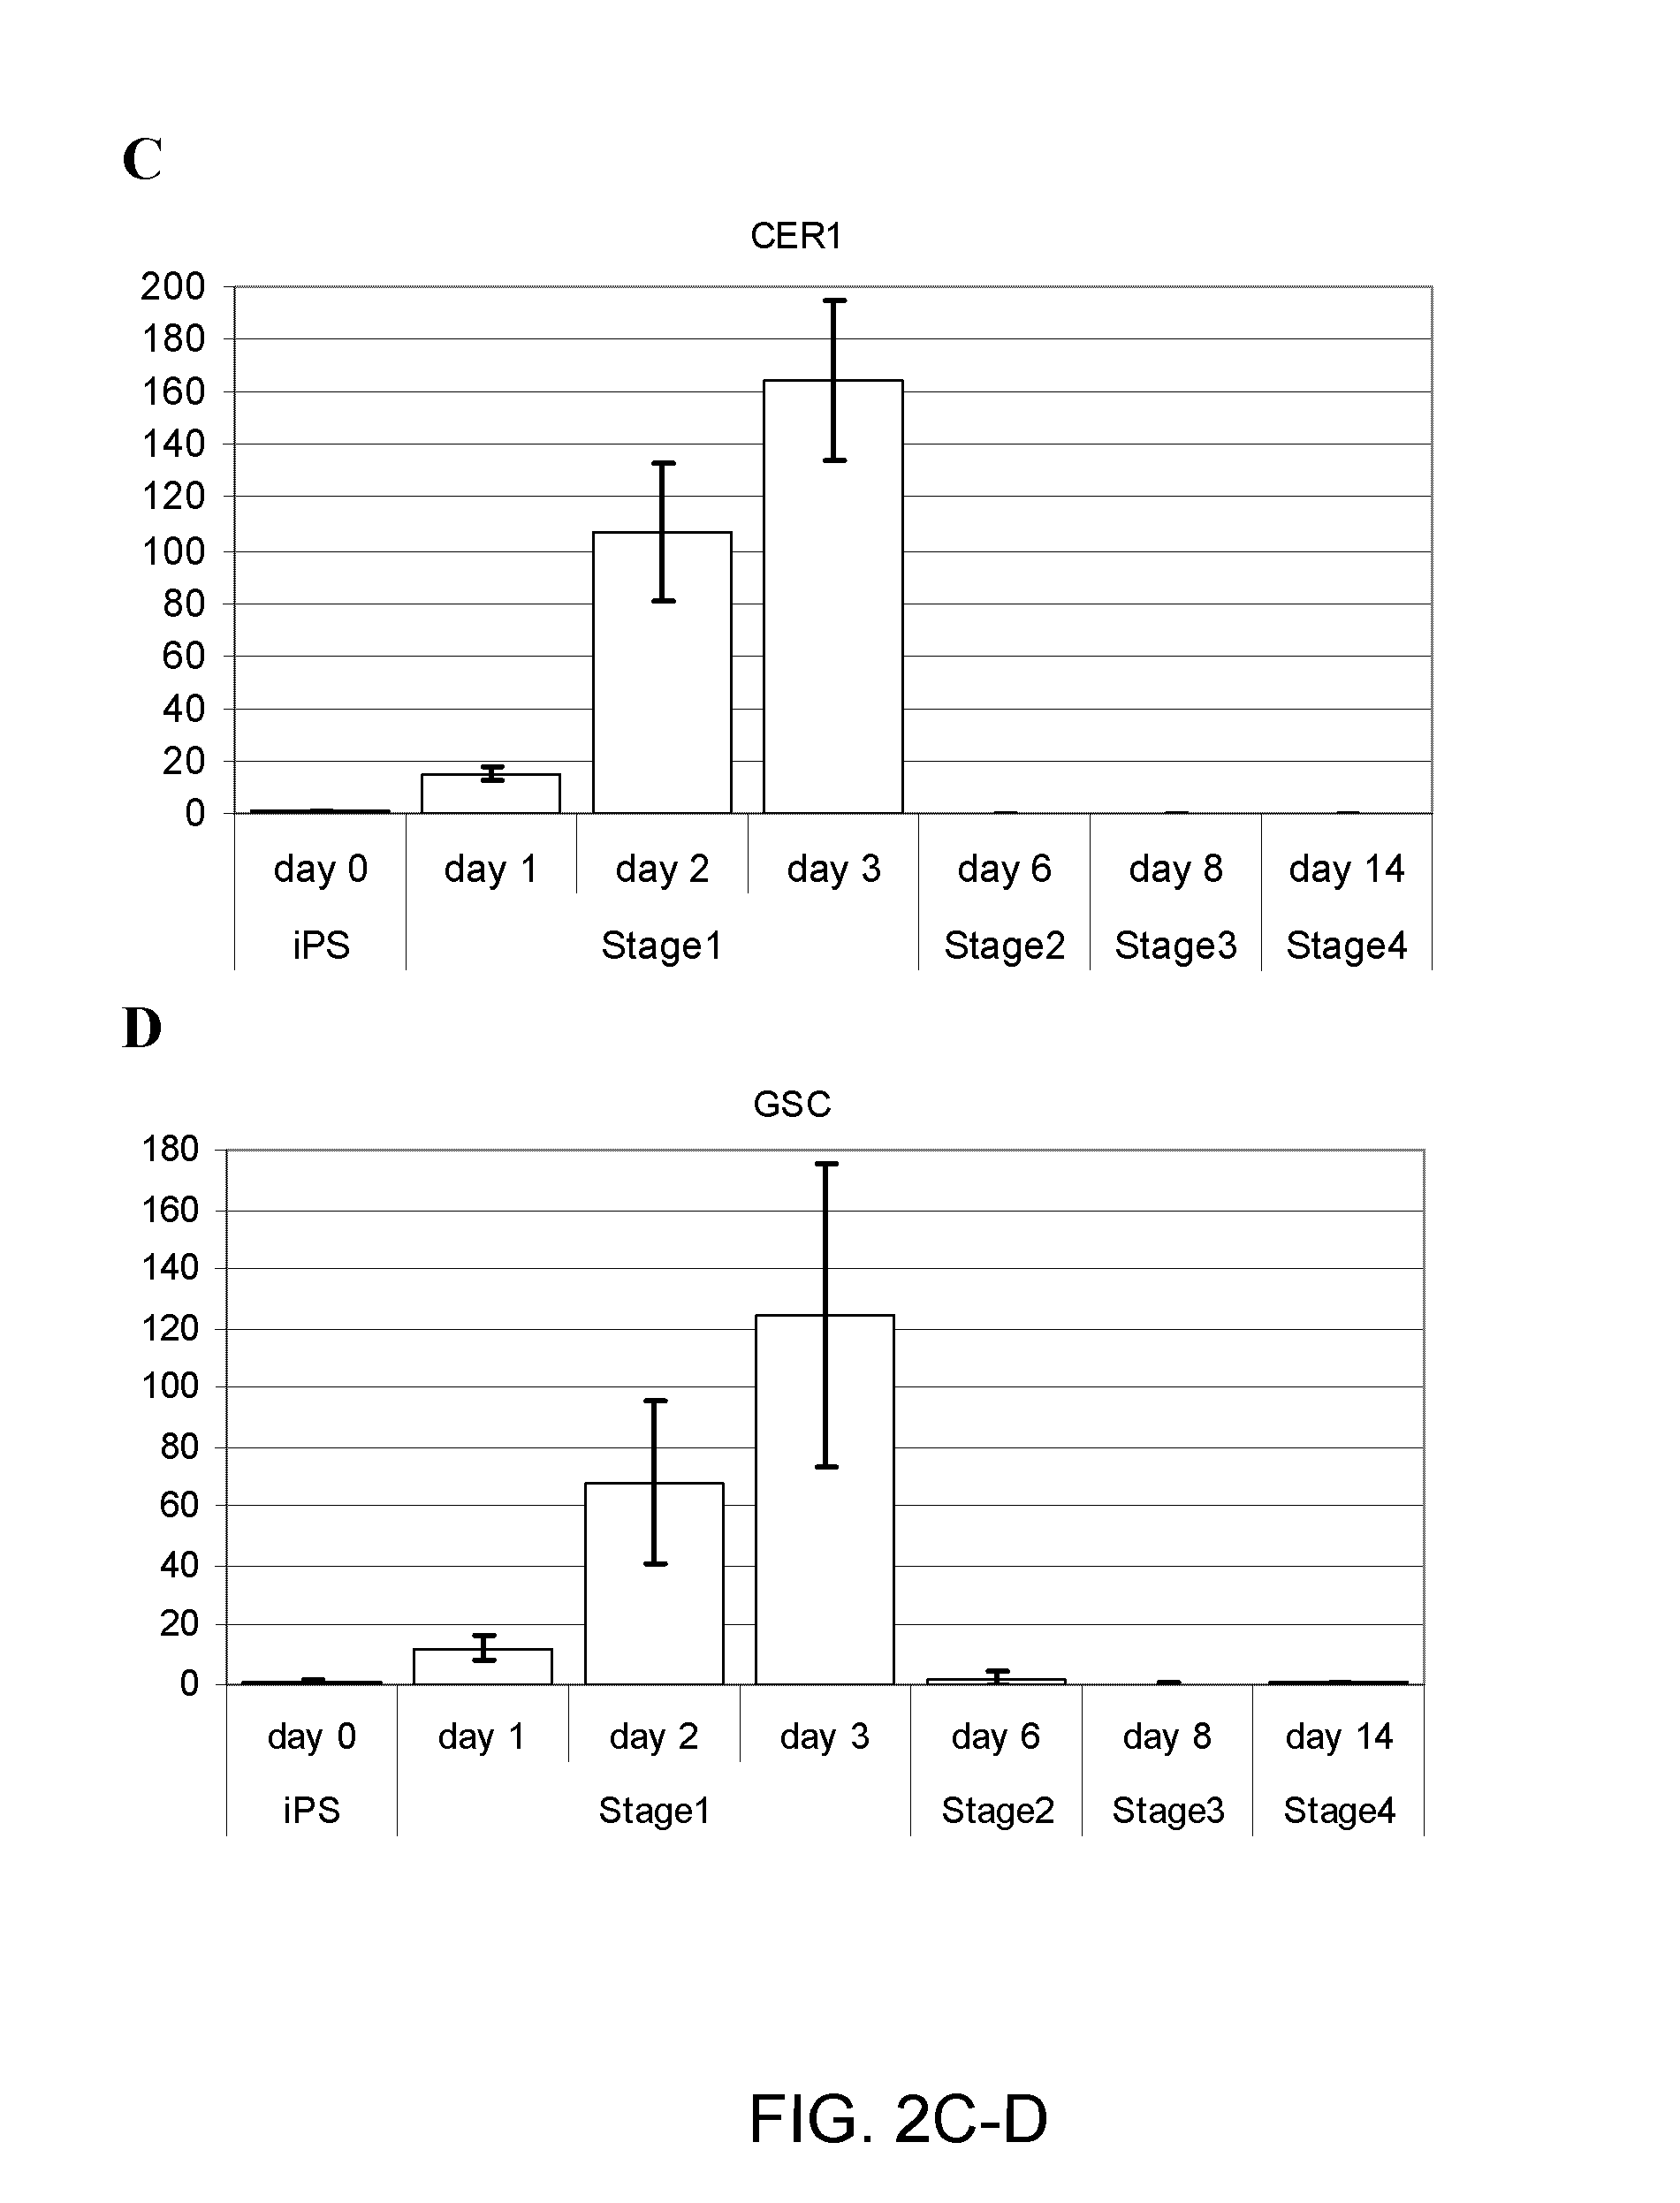 Cell compositions derived from dedifferentiated reprogrammed cells